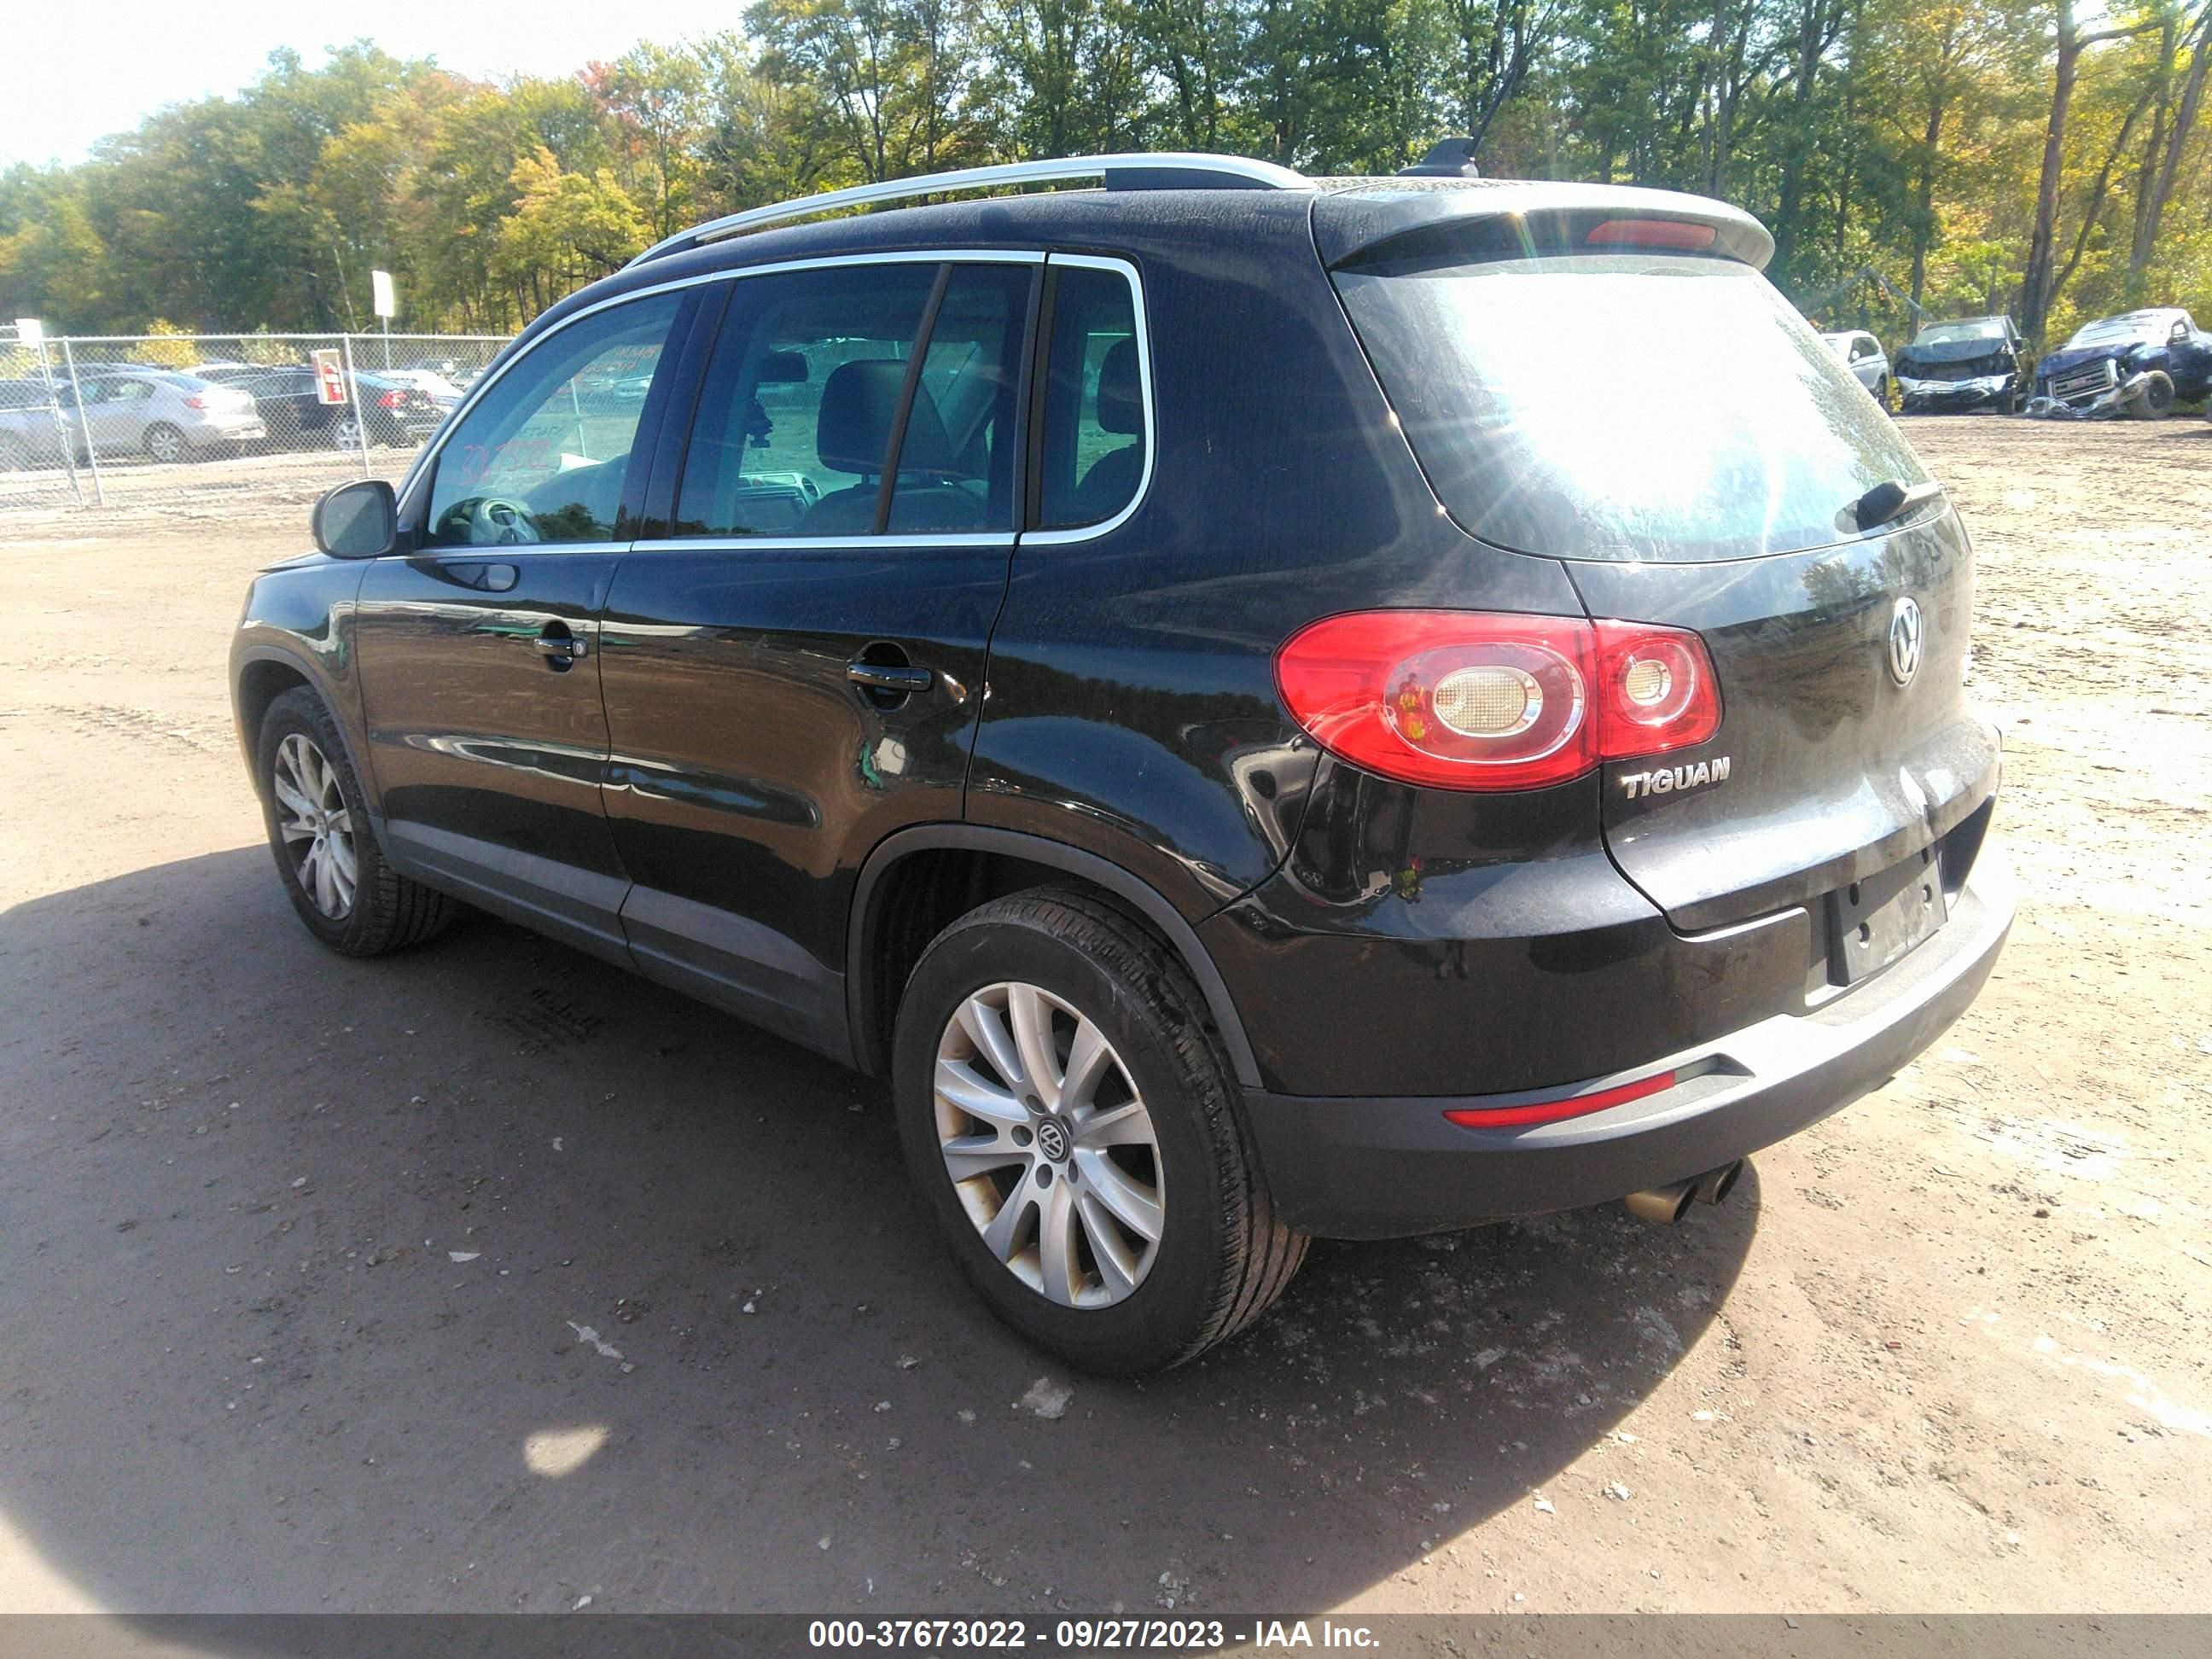 WVGBV7AX0AW510003  - VOLKSWAGEN TIGUAN  2010 IMG - 2